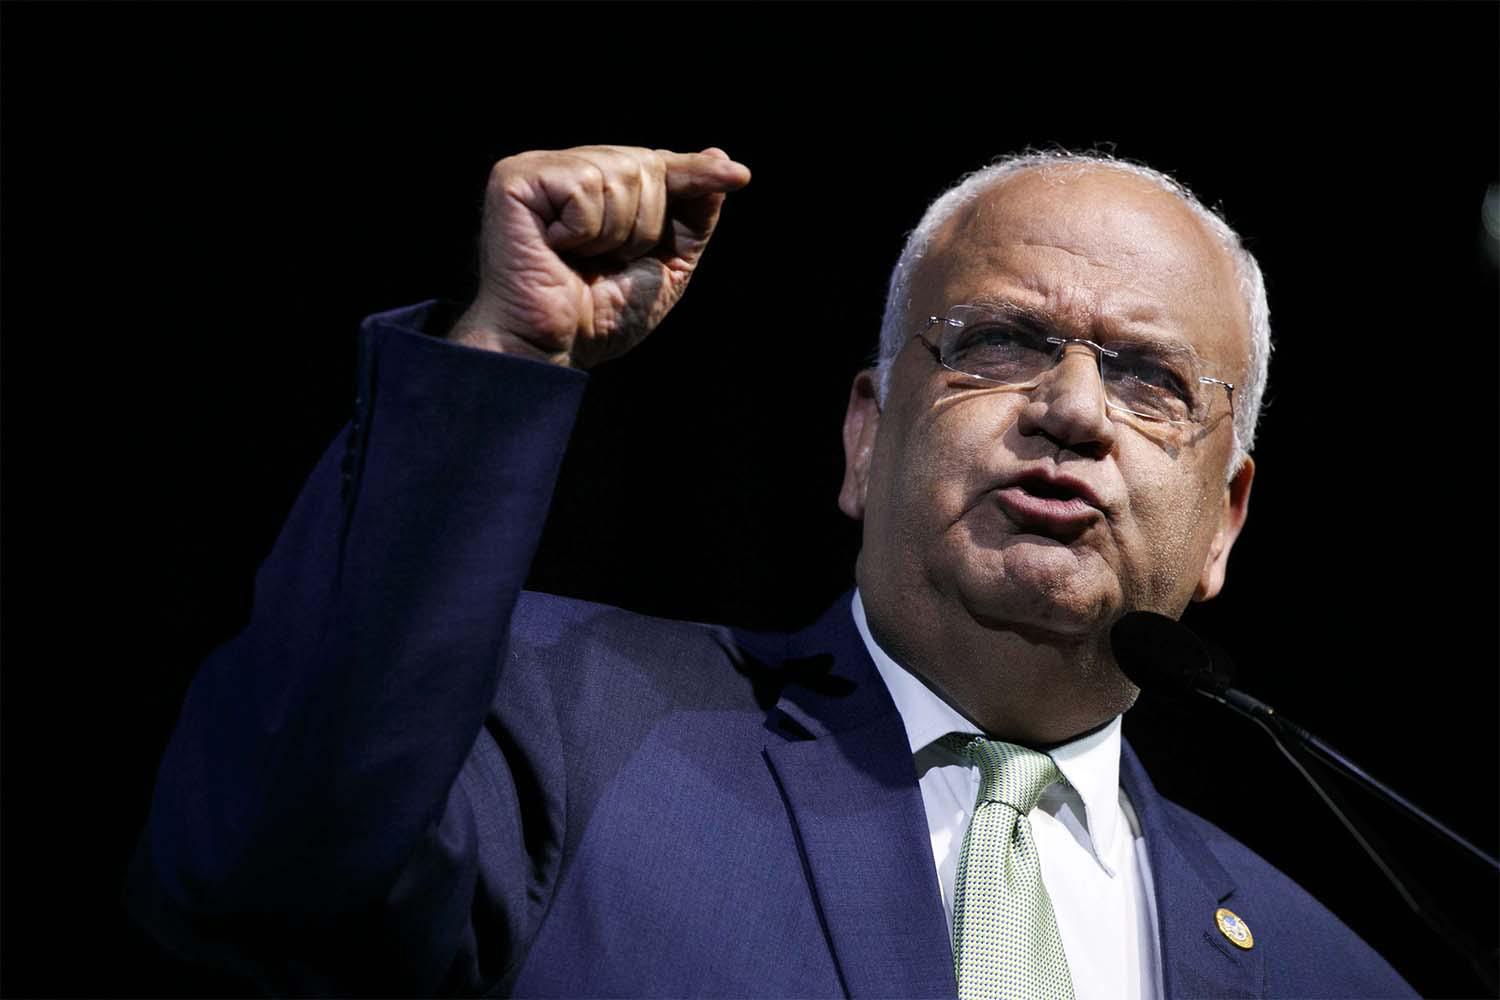 Erekat suffers from a weak immune system and a bacterial infection in addition to COVID-19